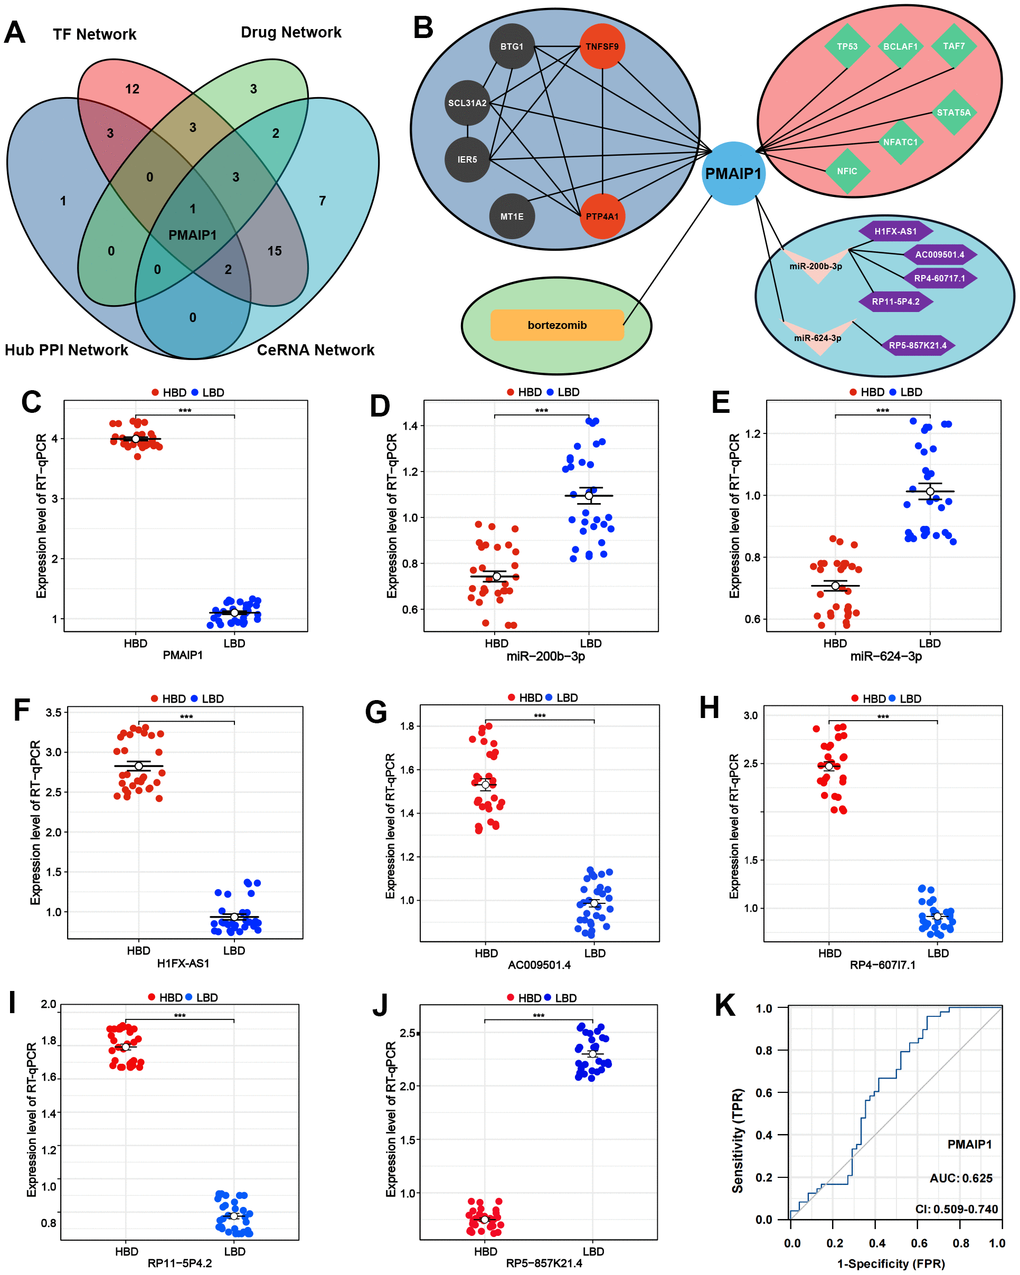 Crucial genes validation and diagnostic model construction of ISS. (A) Venn diagram of intersected genes of hub PPI network, TF network, Drug-mRNA network, and ceRNA network. (B) Network analysis of PMAIP1. (C–J) The expression levels of PMAIP1 and PMAIP1-related genes. (K) Receiver operating characteristic (ROC) for predictive values of PMAIP1.